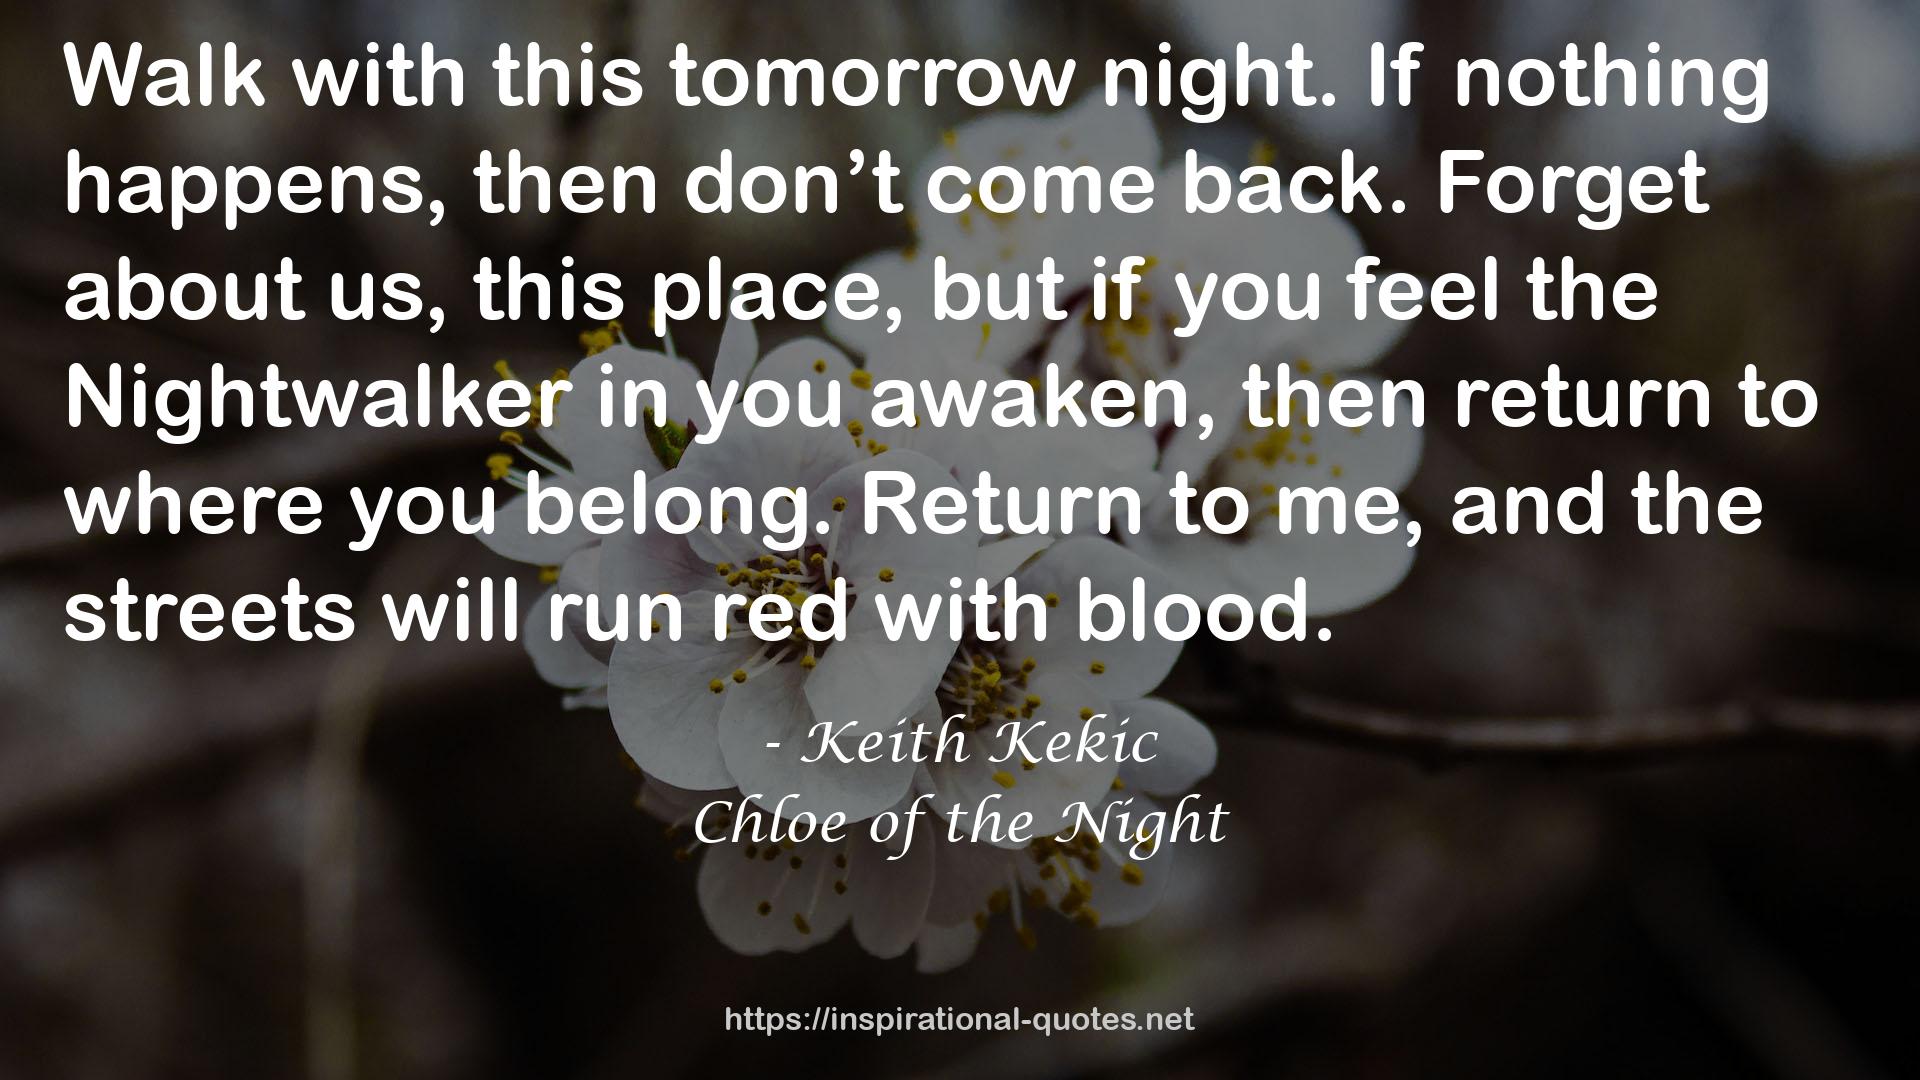 Chloe of the Night QUOTES